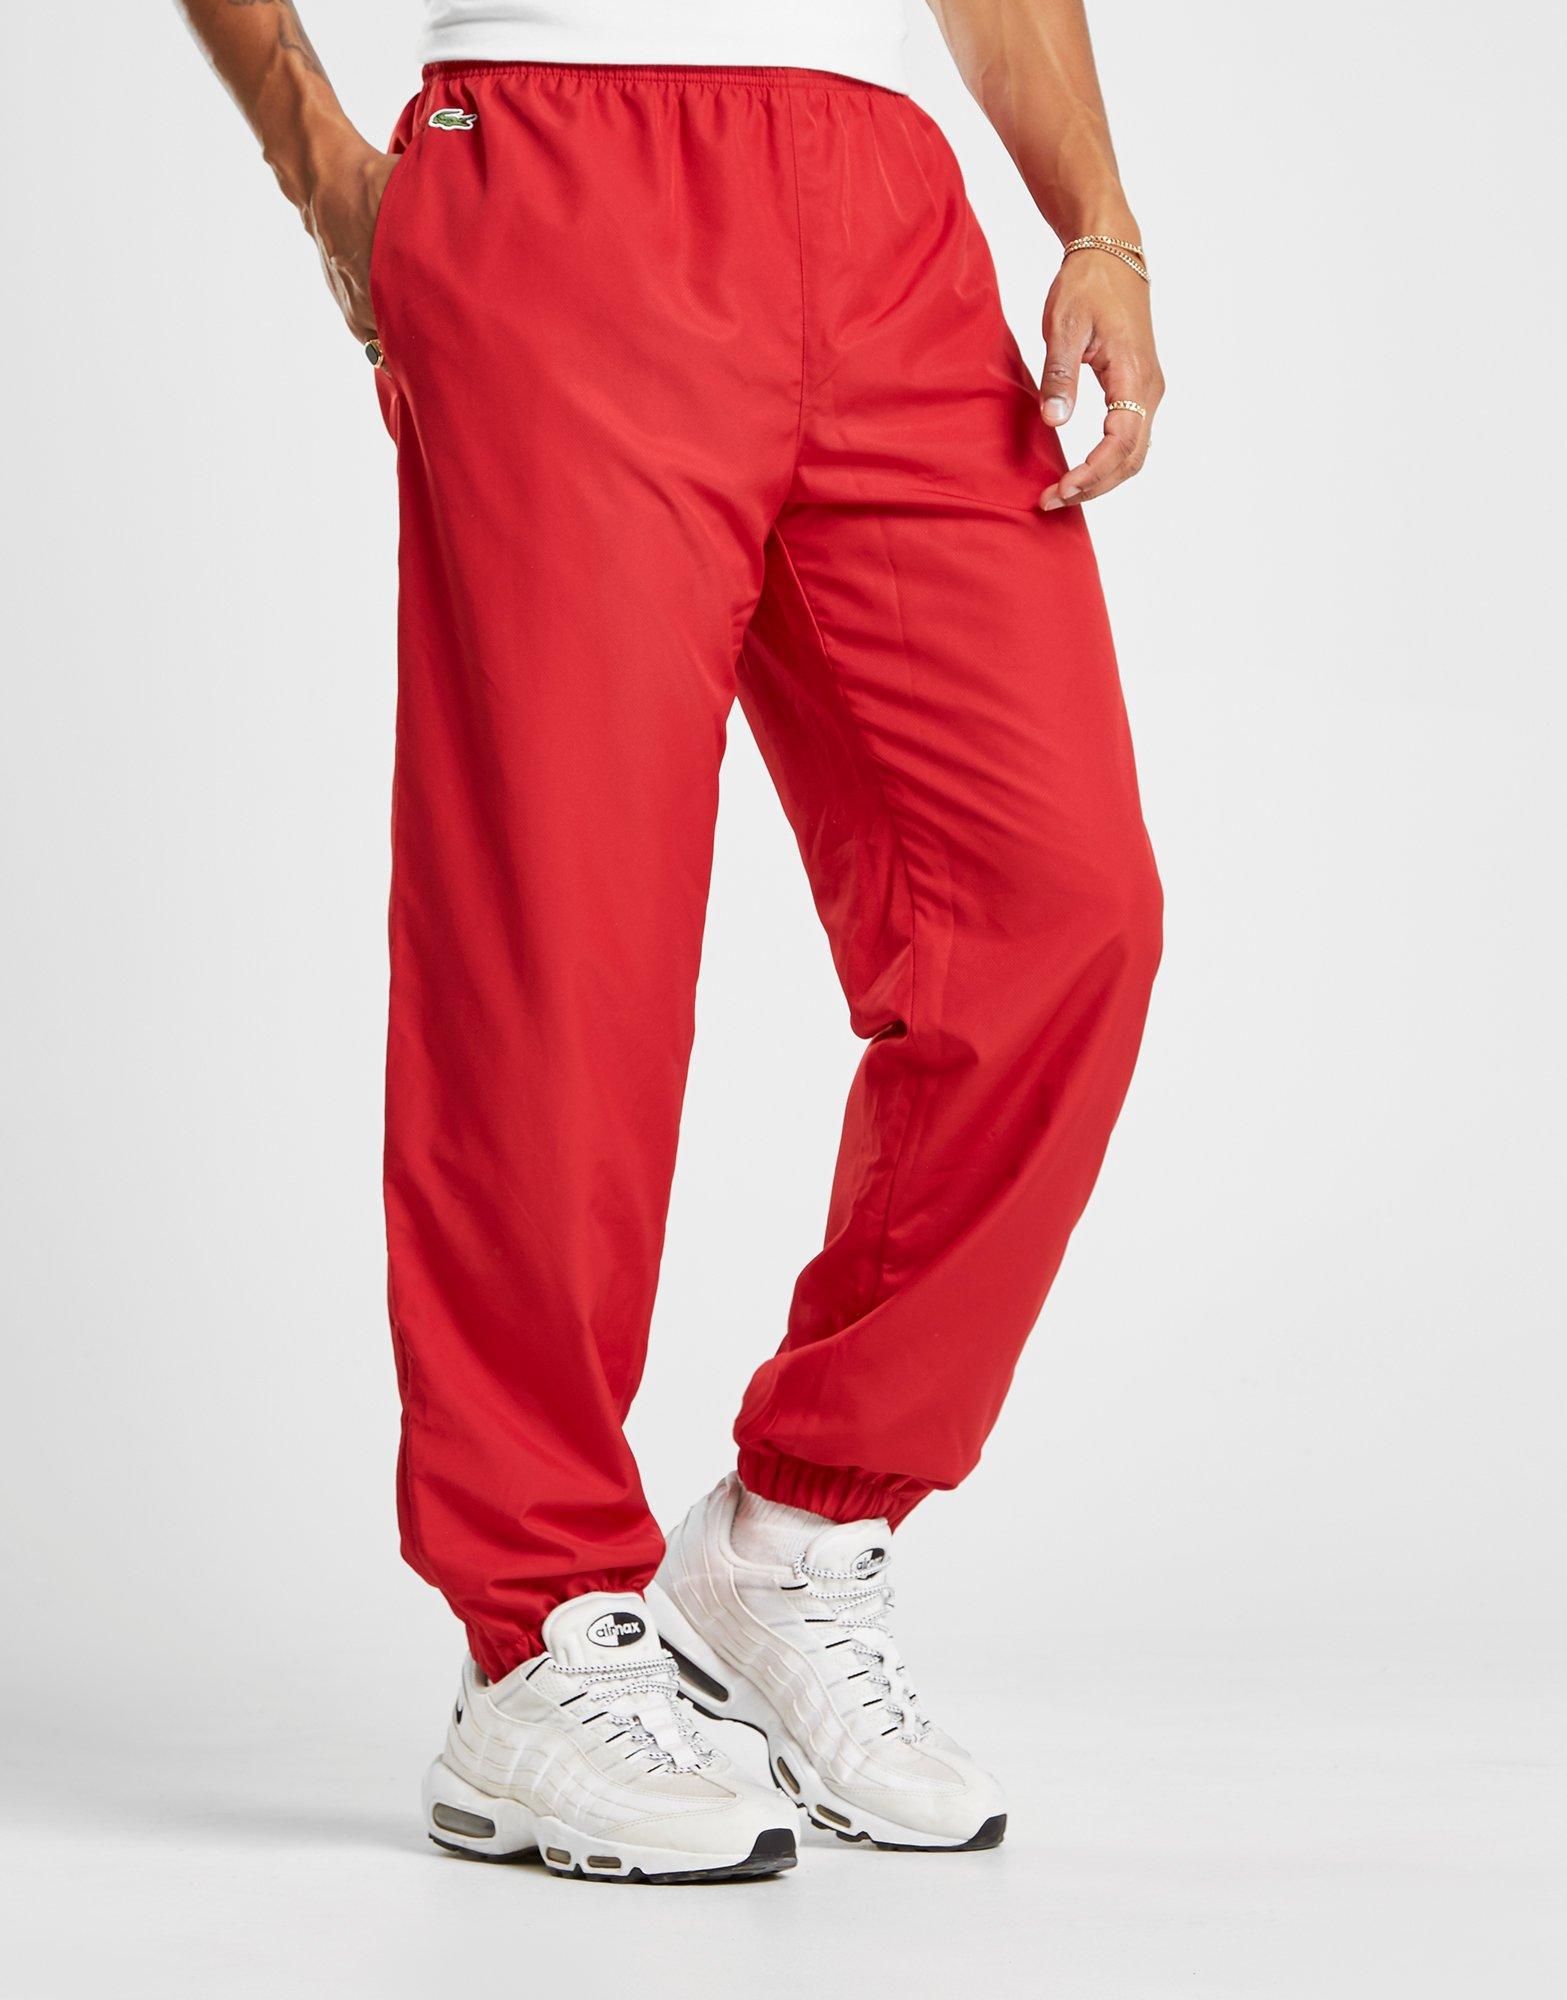 Red Lacoste Guppy Pants Sweden, SAVE 57% - eagleflair.com